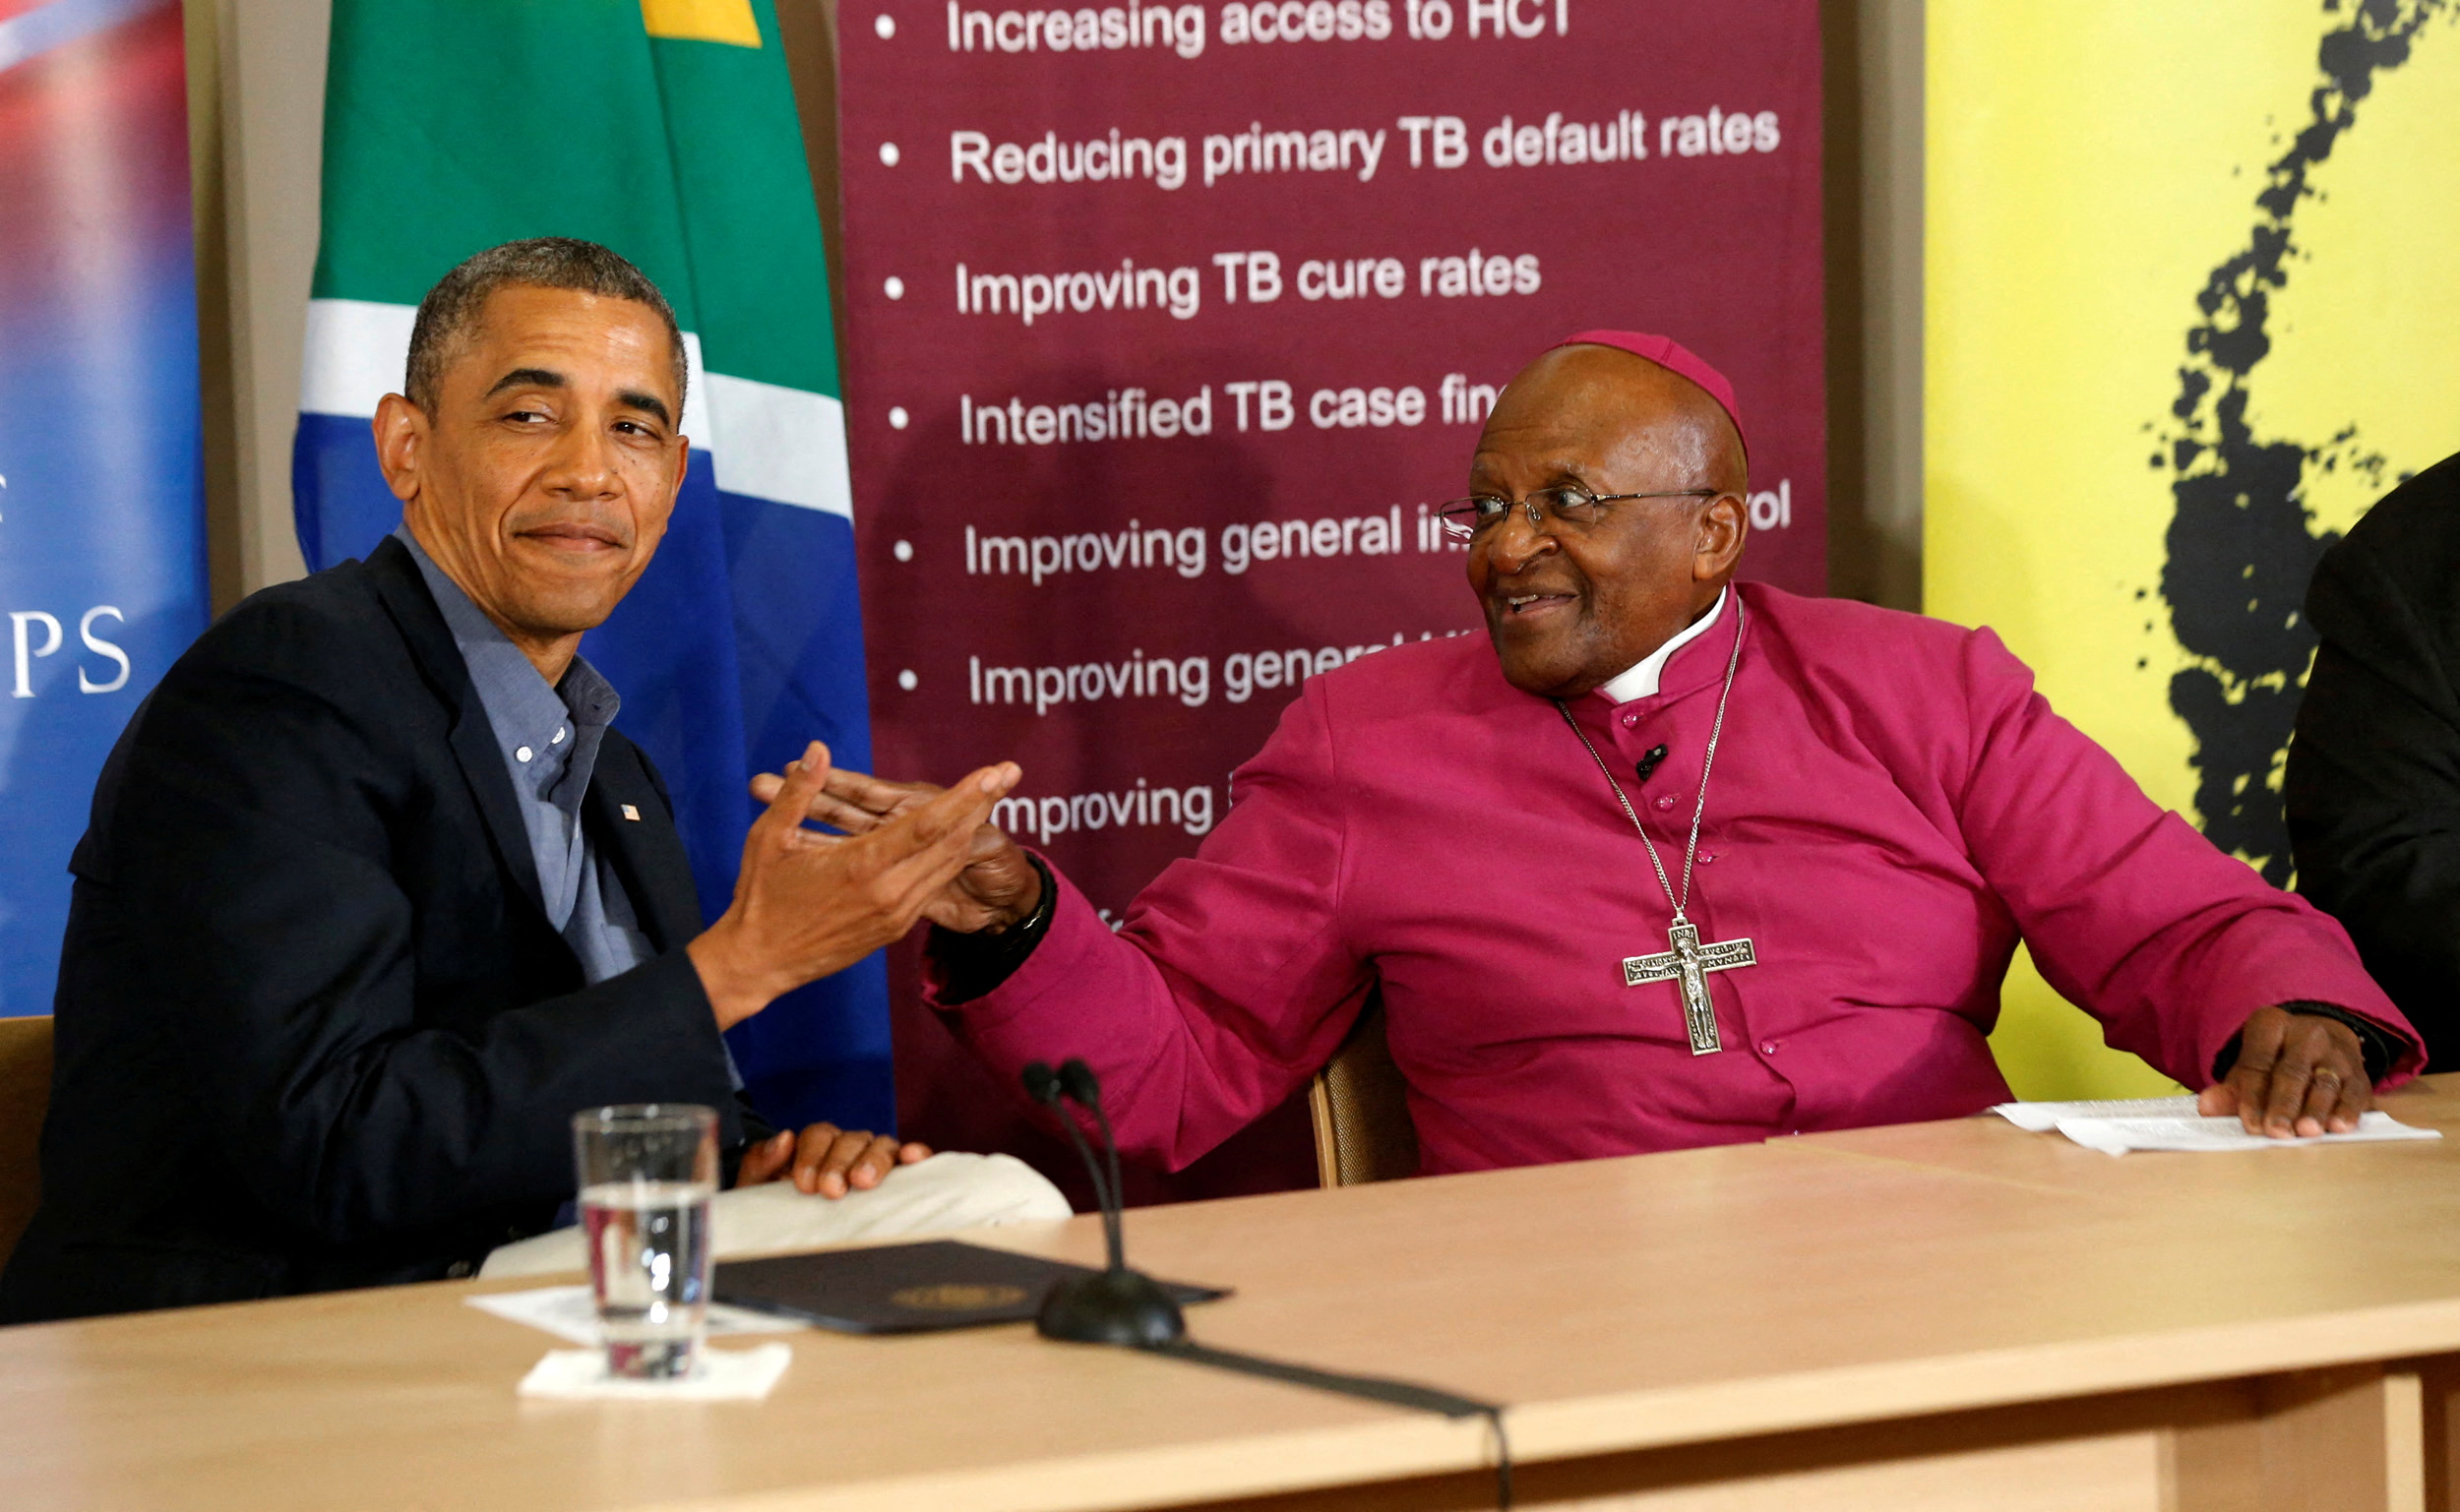 U.S. President Barack Obama is pictured alongside Desmond Tutu as he visits his HIV Foundation Youth Centre and takes part in a health event with youth in Cape Town